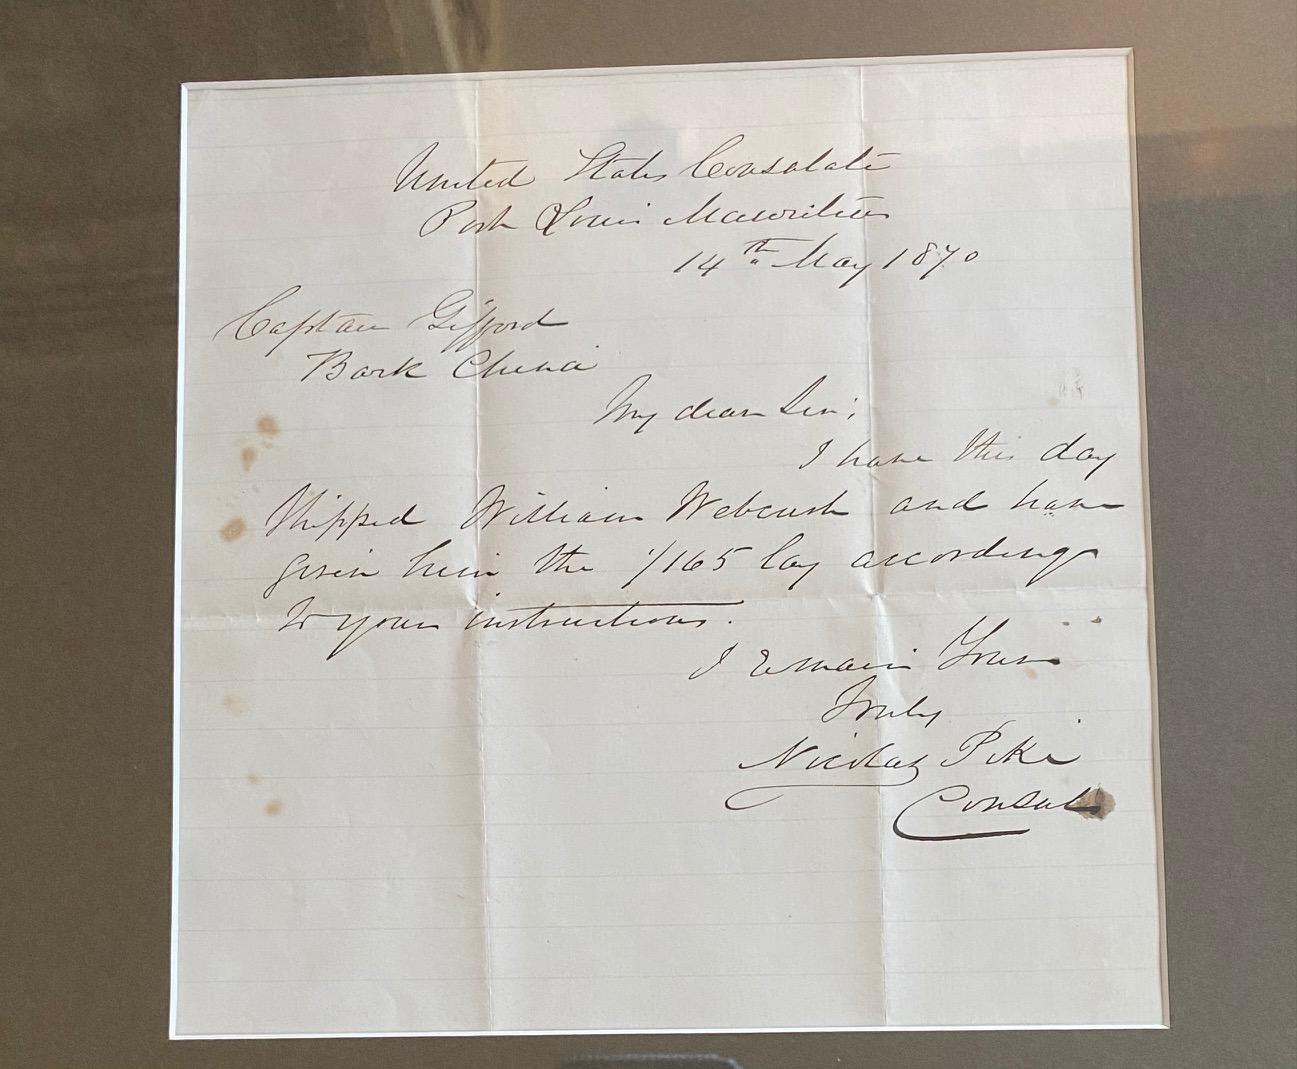 19th century Whaleman's Letter Delivered on Whaling Grounds, addressed to Captain Charles H. Gifford aboard the Whaling Bark CHINA, 14 May 1870, a letter from the American Consulate in Port Louis on the island of Mauritius, informing Capt Gifford